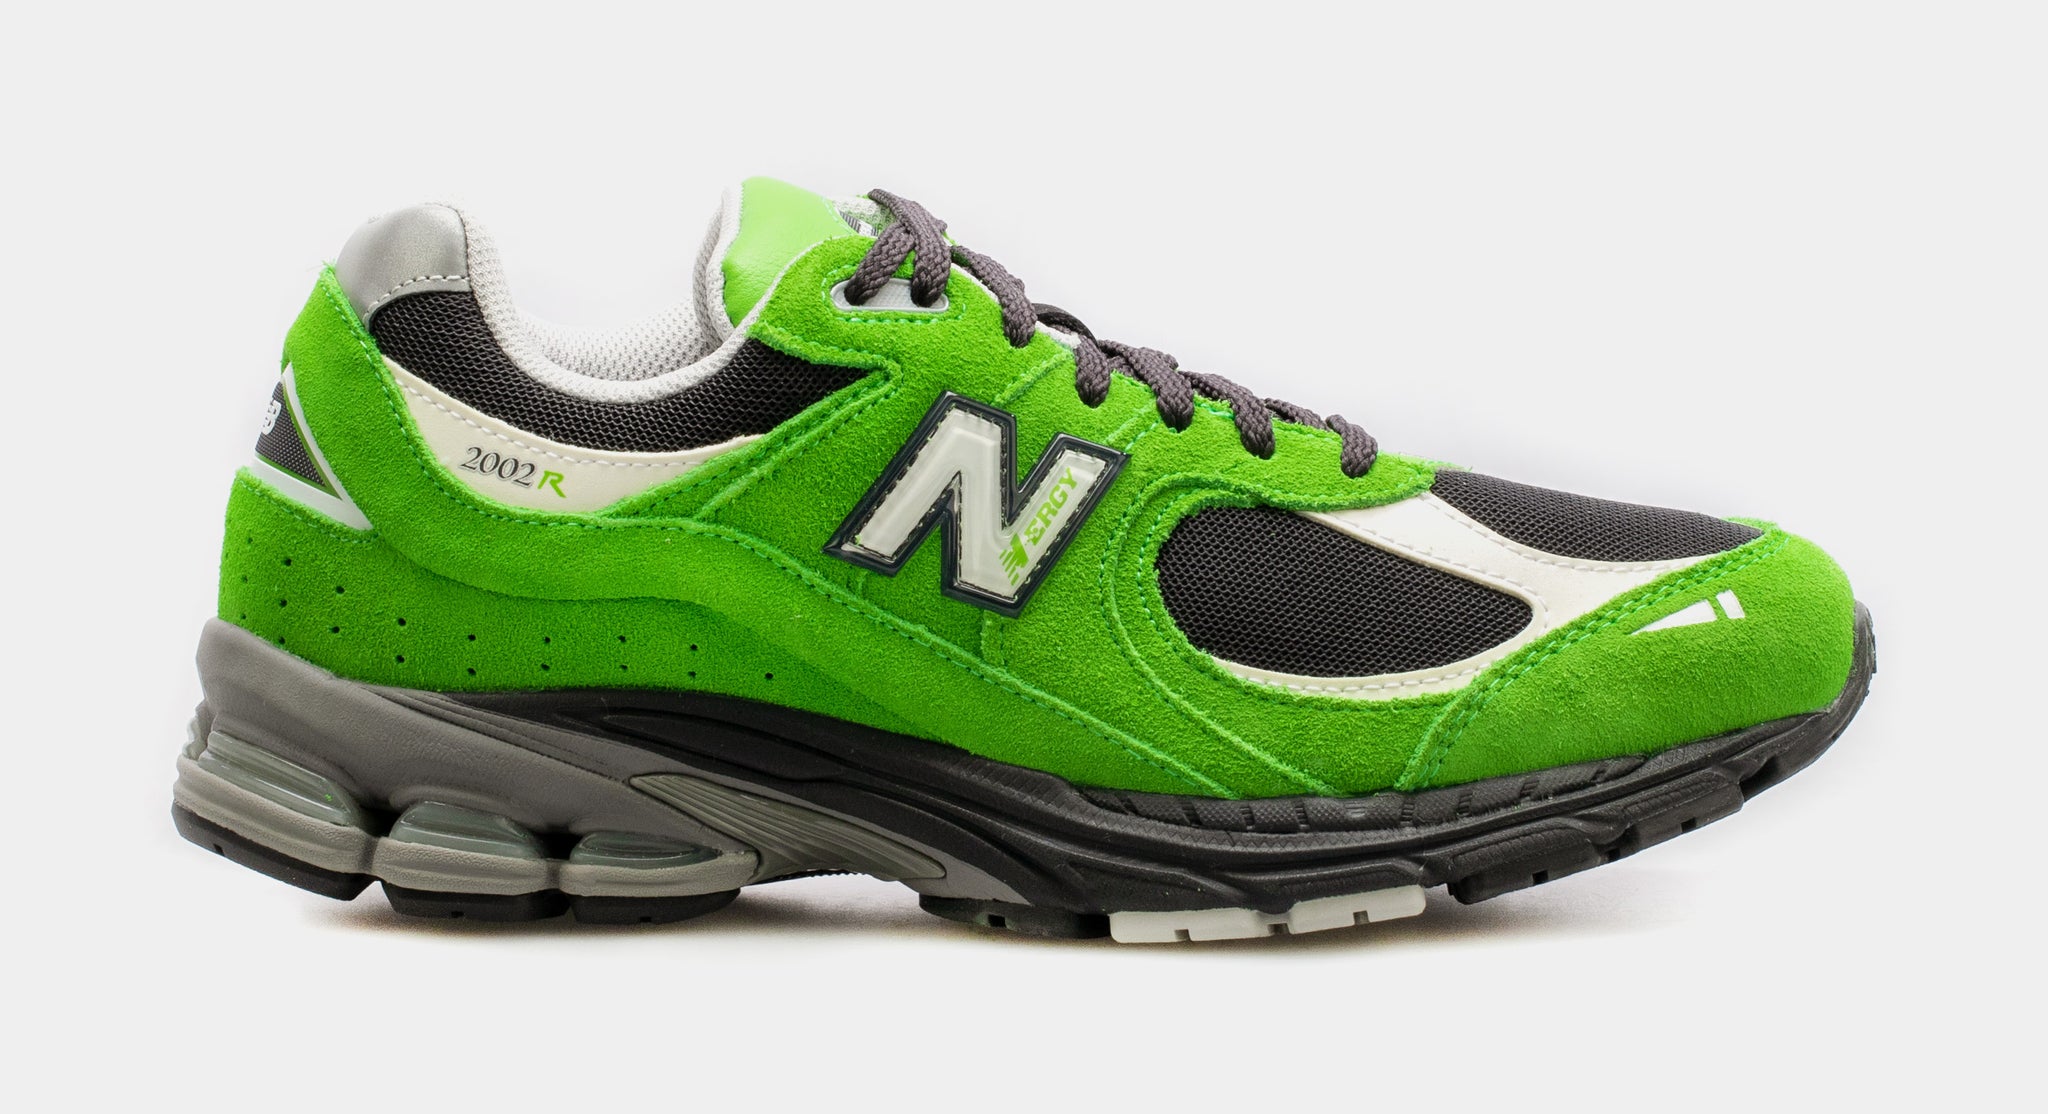 New Balance 2002R Good Vibes Pack Mens Running Shoes Green 